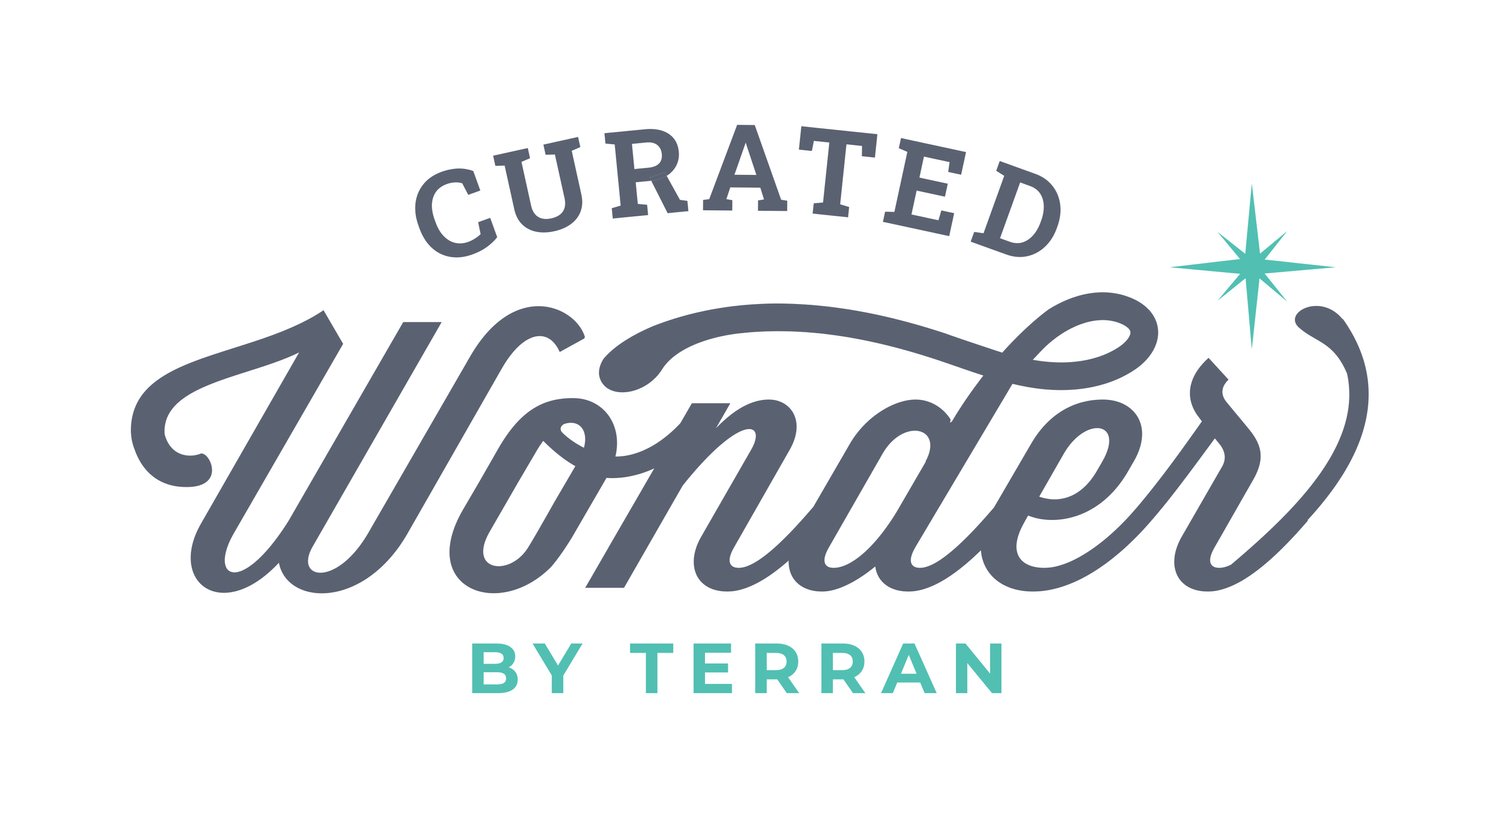 Curated Wonder